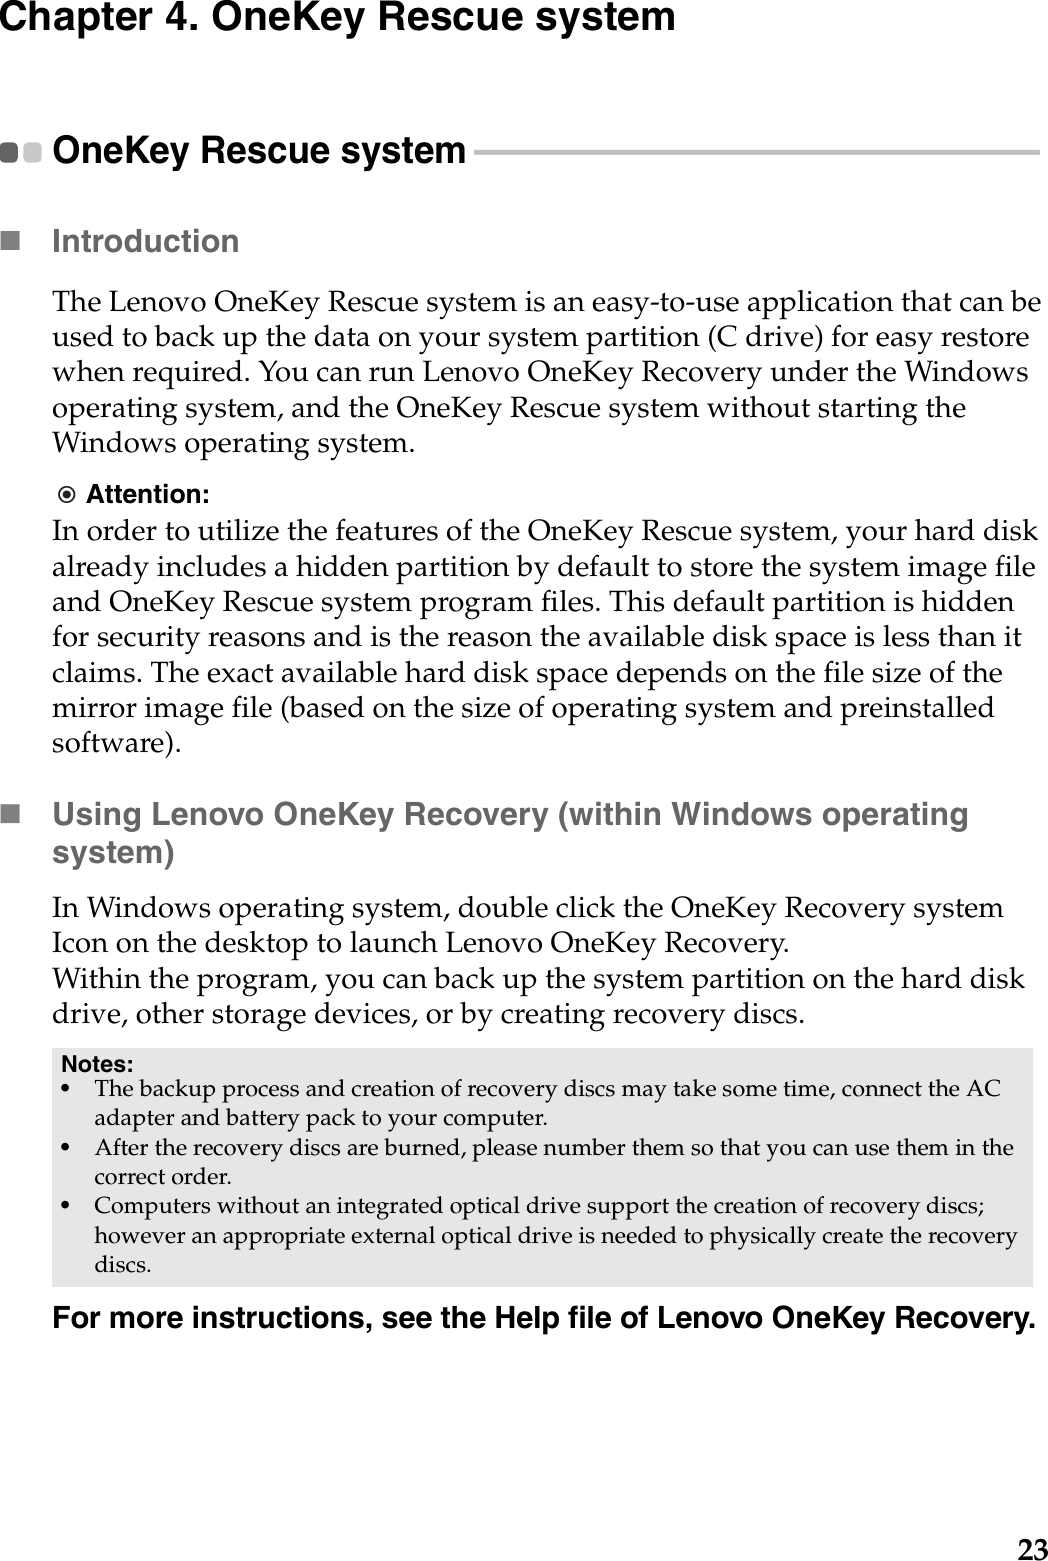 23Chapter 4. OneKey Rescue systemOneKey Rescue system  - - - - - - - - - - - - - - - - - - - - - - - - - - - - - - - - - - - - - - - - - - - - - - - - - - - - - - - - - - - - - - - - - - - - - - Introduction  The Lenovo OneKey Rescue system is an easy-to-use application that can be used to back up the data on your system partition (C drive) for easy restore when required. You can run Lenovo OneKey Recovery under the Windows operating system, and the OneKey Rescue system without starting the Windows operating system.Attention:In order to utilize the features of the OneKey Rescue system, your hard disk already includes a hidden partition by default to store the system image file and OneKey Rescue system program files. This default partition is hidden for security reasons and is the reason the available disk space is less than it claims. The exact available hard disk space depends on the file size of the mirror image file (based on the size of operating system and preinstalled software).Using Lenovo OneKey Recovery (within Windows operating system)In Windows operating system, double click the OneKey Recovery system Icon on the desktop to launch Lenovo OneKey Recovery. Within the program, you can back up the system partition on the hard disk drive, other storage devices, or by creating recovery discs. For more instructions, see the Help file of Lenovo OneKey Recovery.Notes:•The backup process and creation of recovery discs may take some time, connect the AC adapter and battery pack to your computer.•After the recovery discs are burned, please number them so that you can use them in the correct order.•Computers without an integrated optical drive support the creation of recovery discs; however an appropriate external optical drive is needed to physically create the recovery discs.